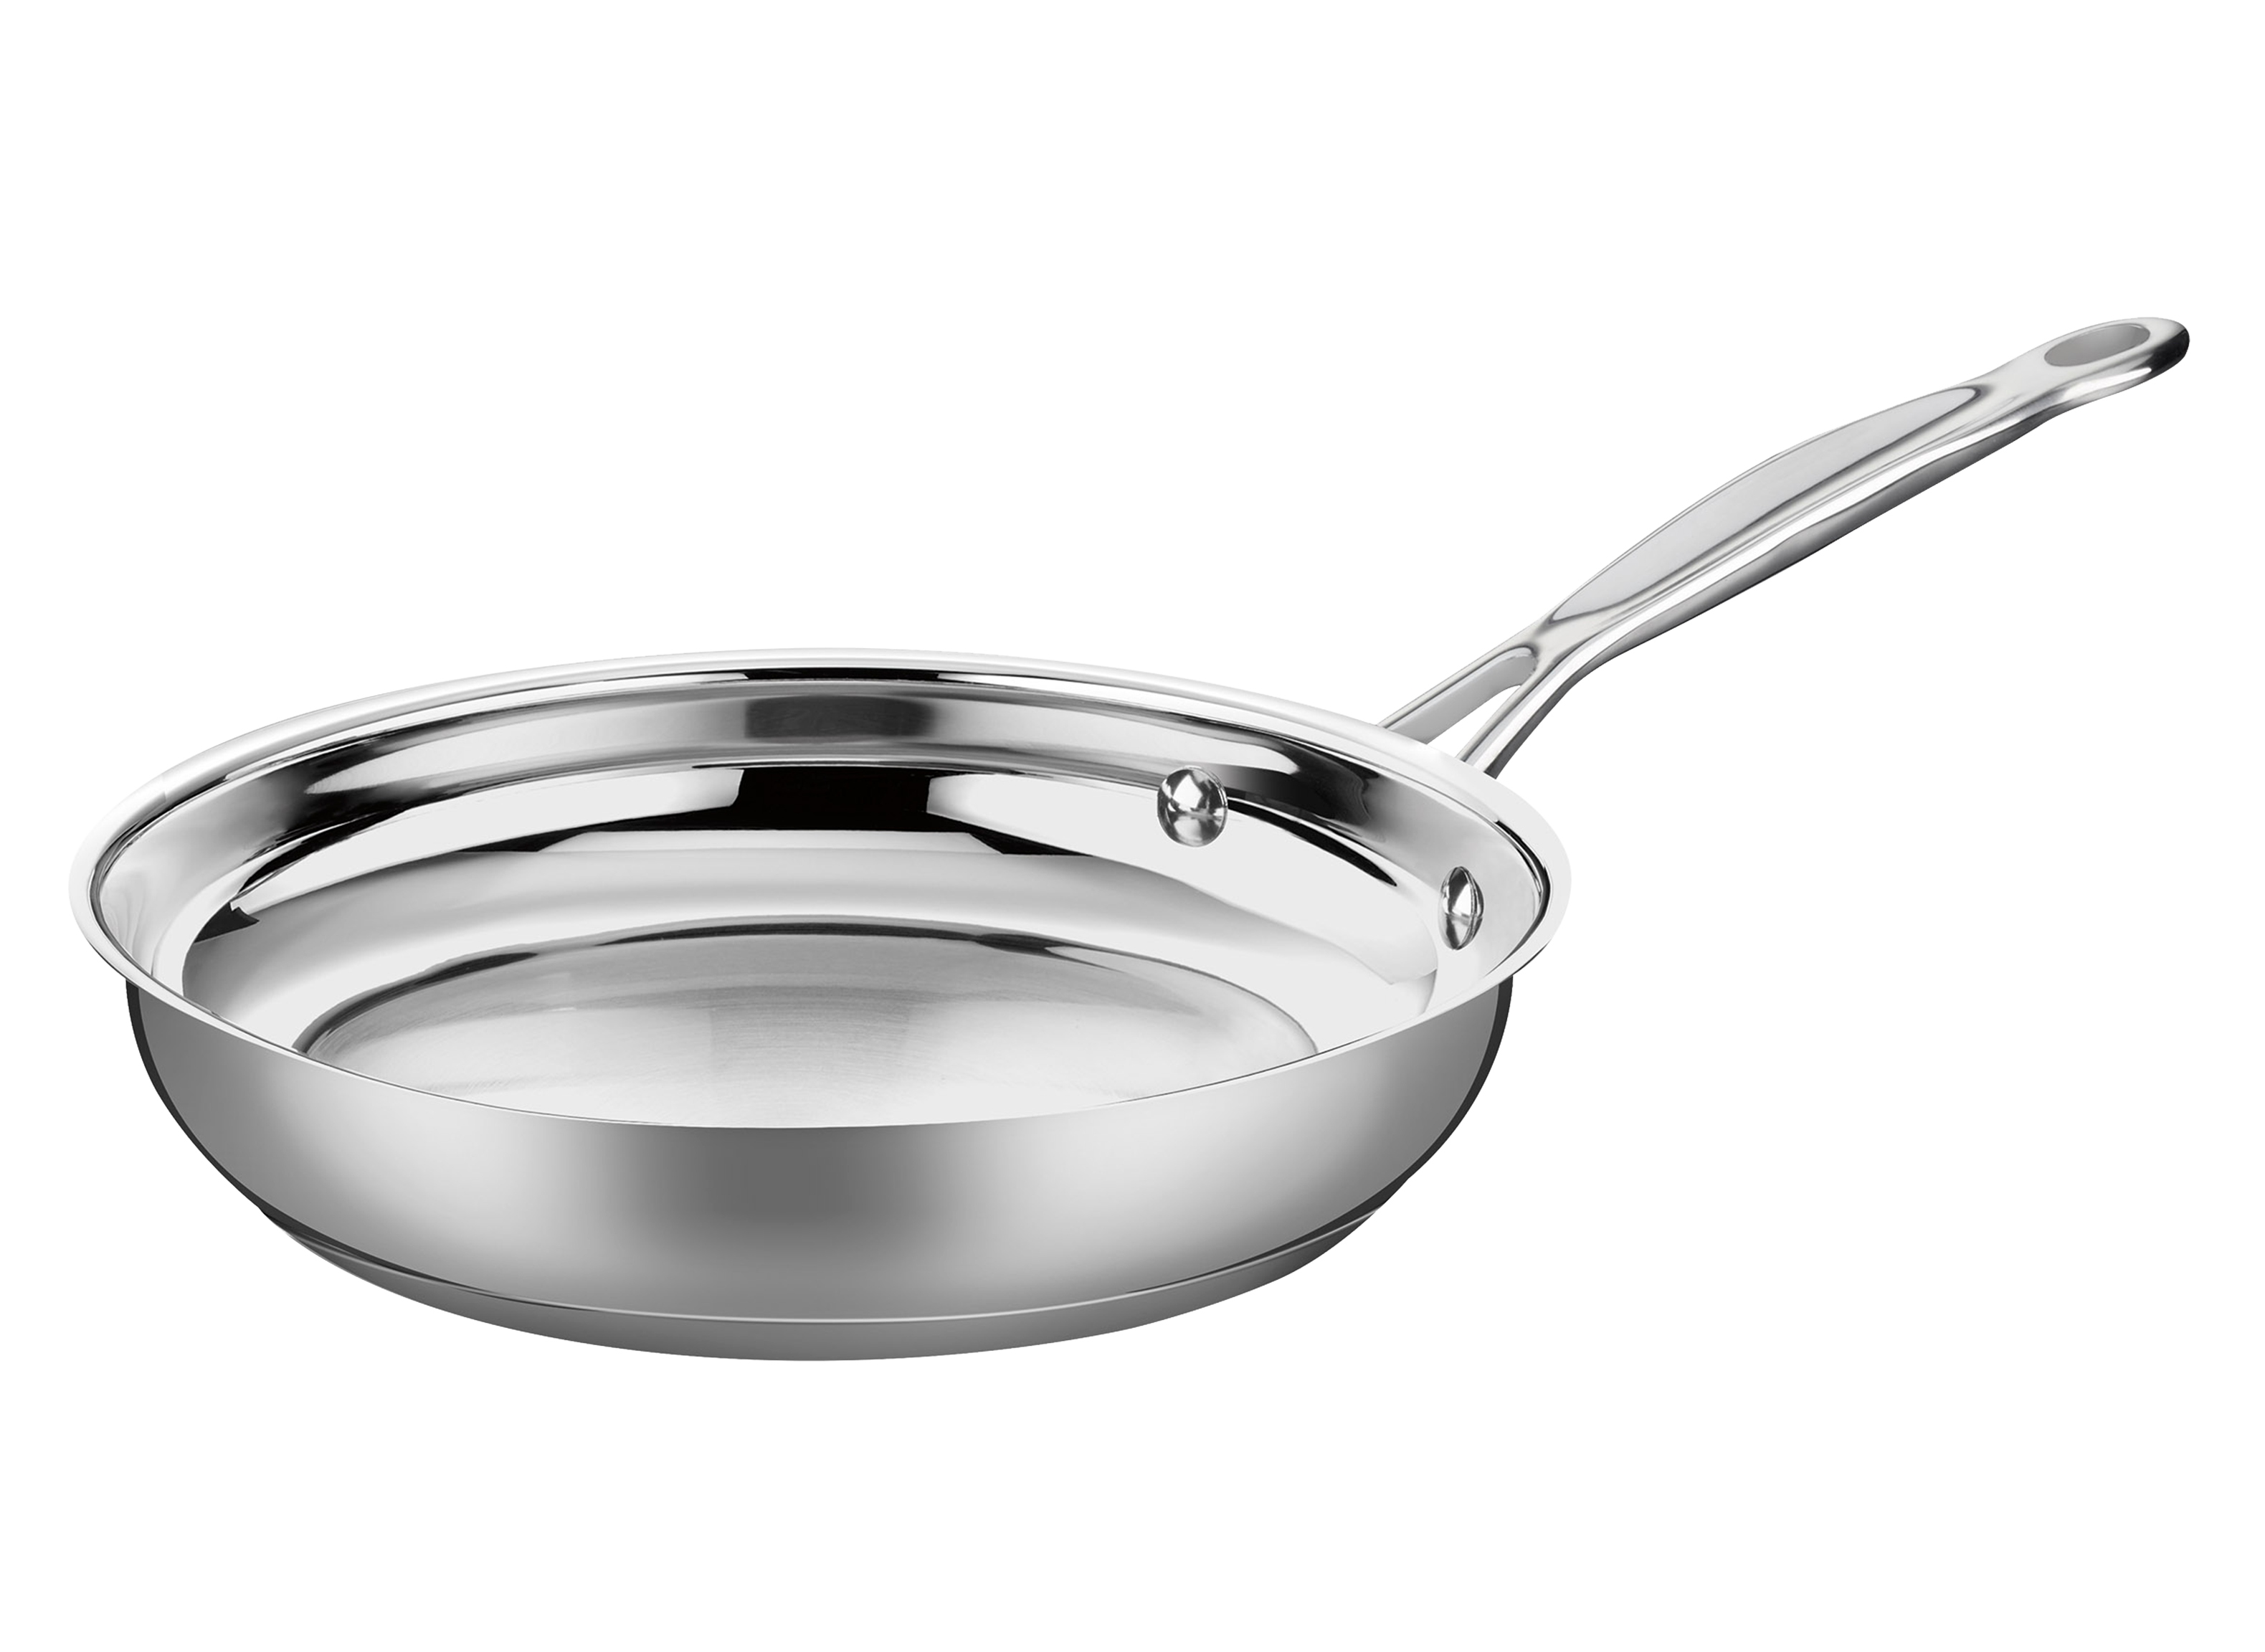 https://crdms.images.consumerreports.org/prod/products/cr/models/398747-frying-pans-other-cuisinart-chef-classic-722-24-10005844.png